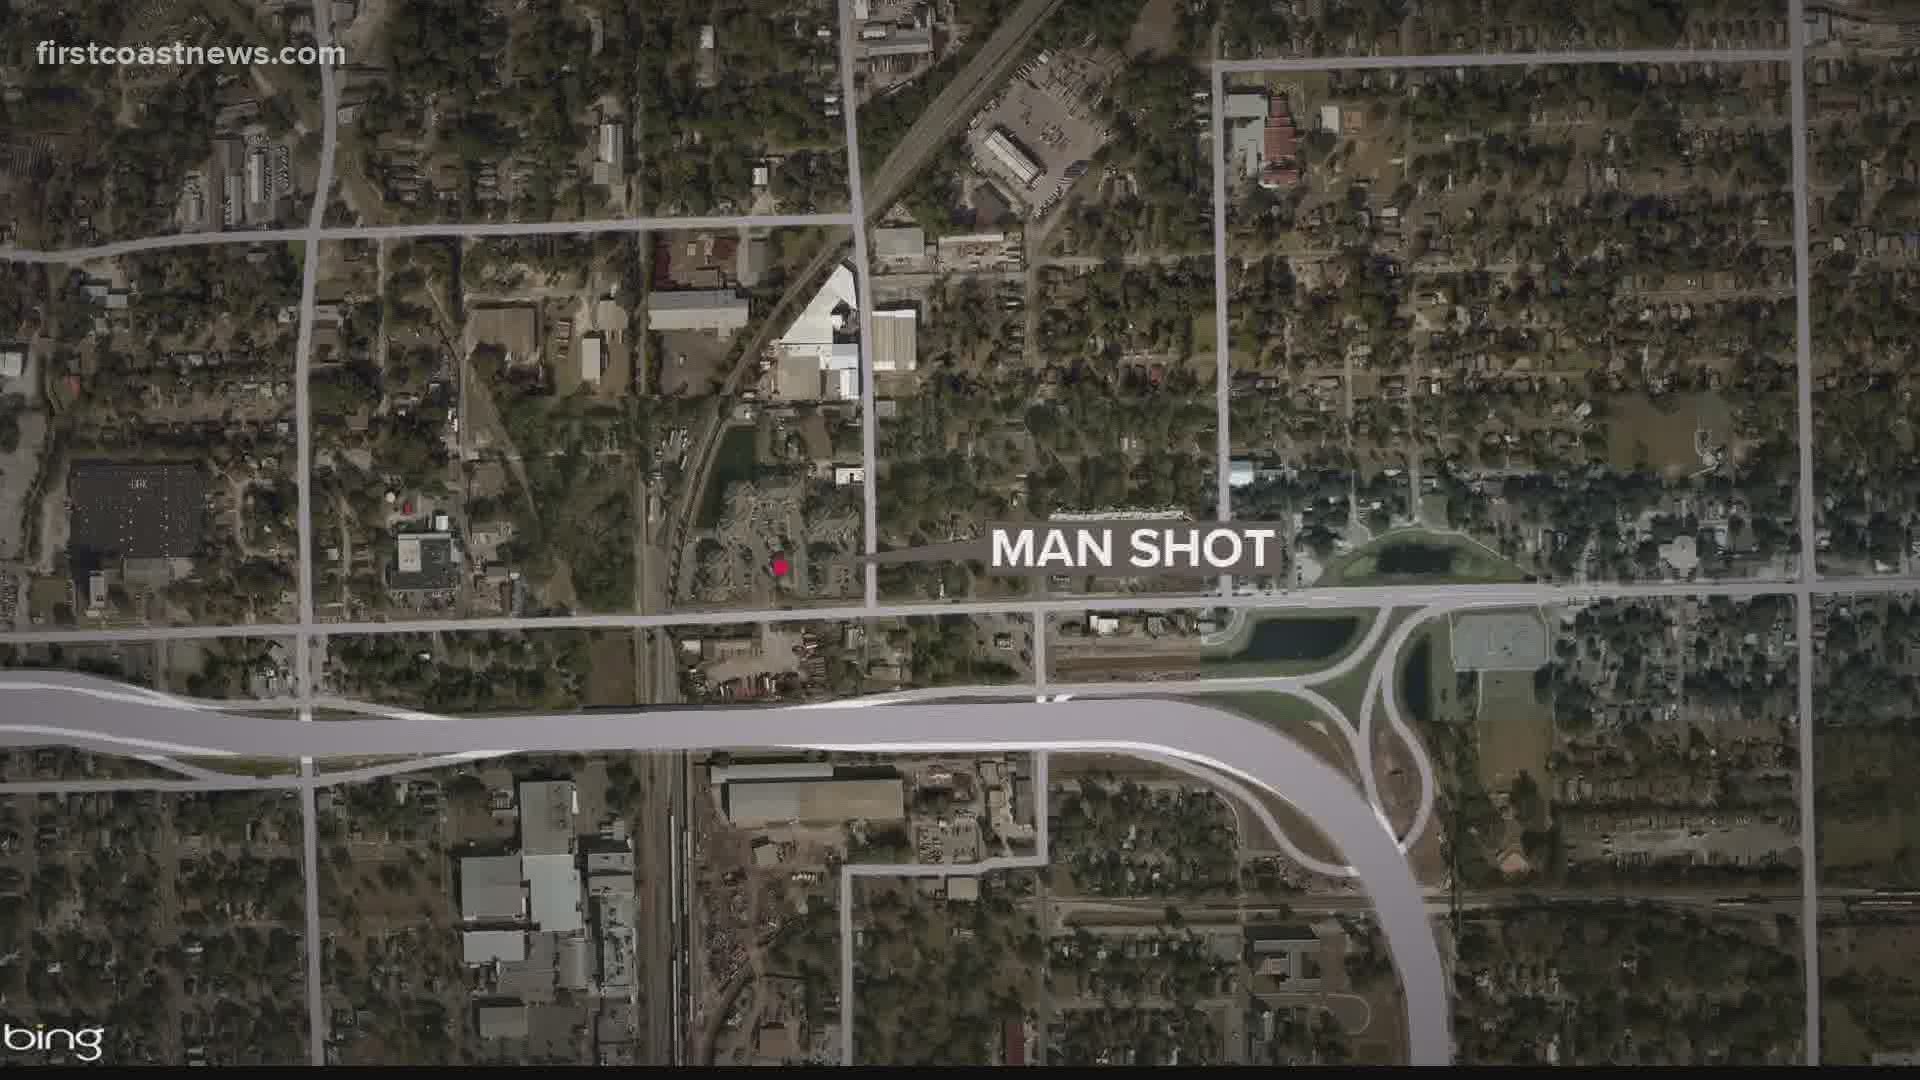 Once at the scene, officers found a 29-year-old man suffering from gunshot wounds.